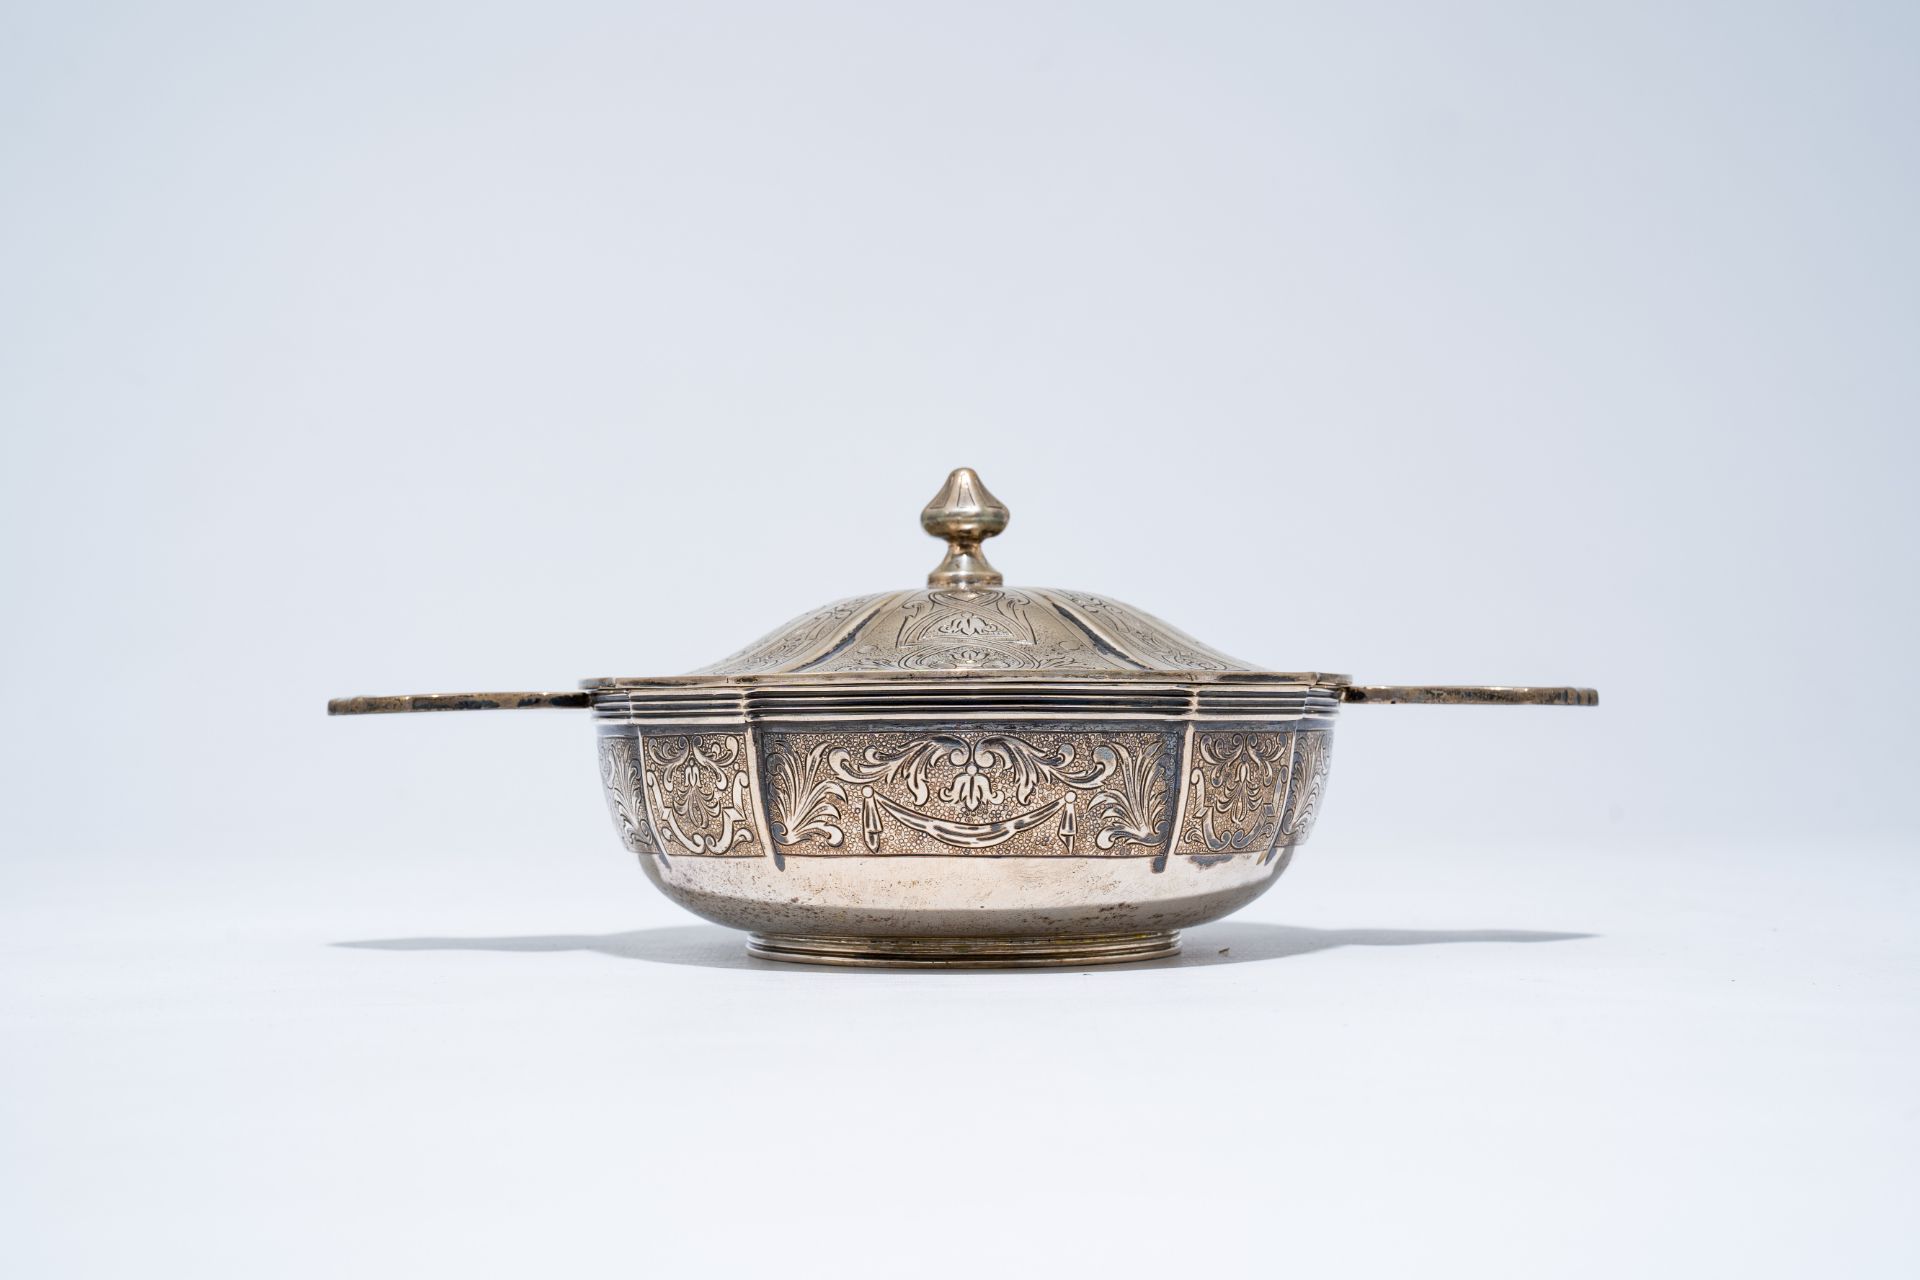 A Belgian silver bowl and cover with floral design, maker's mark Wolfers, 800/000, 20th C. - Image 5 of 9